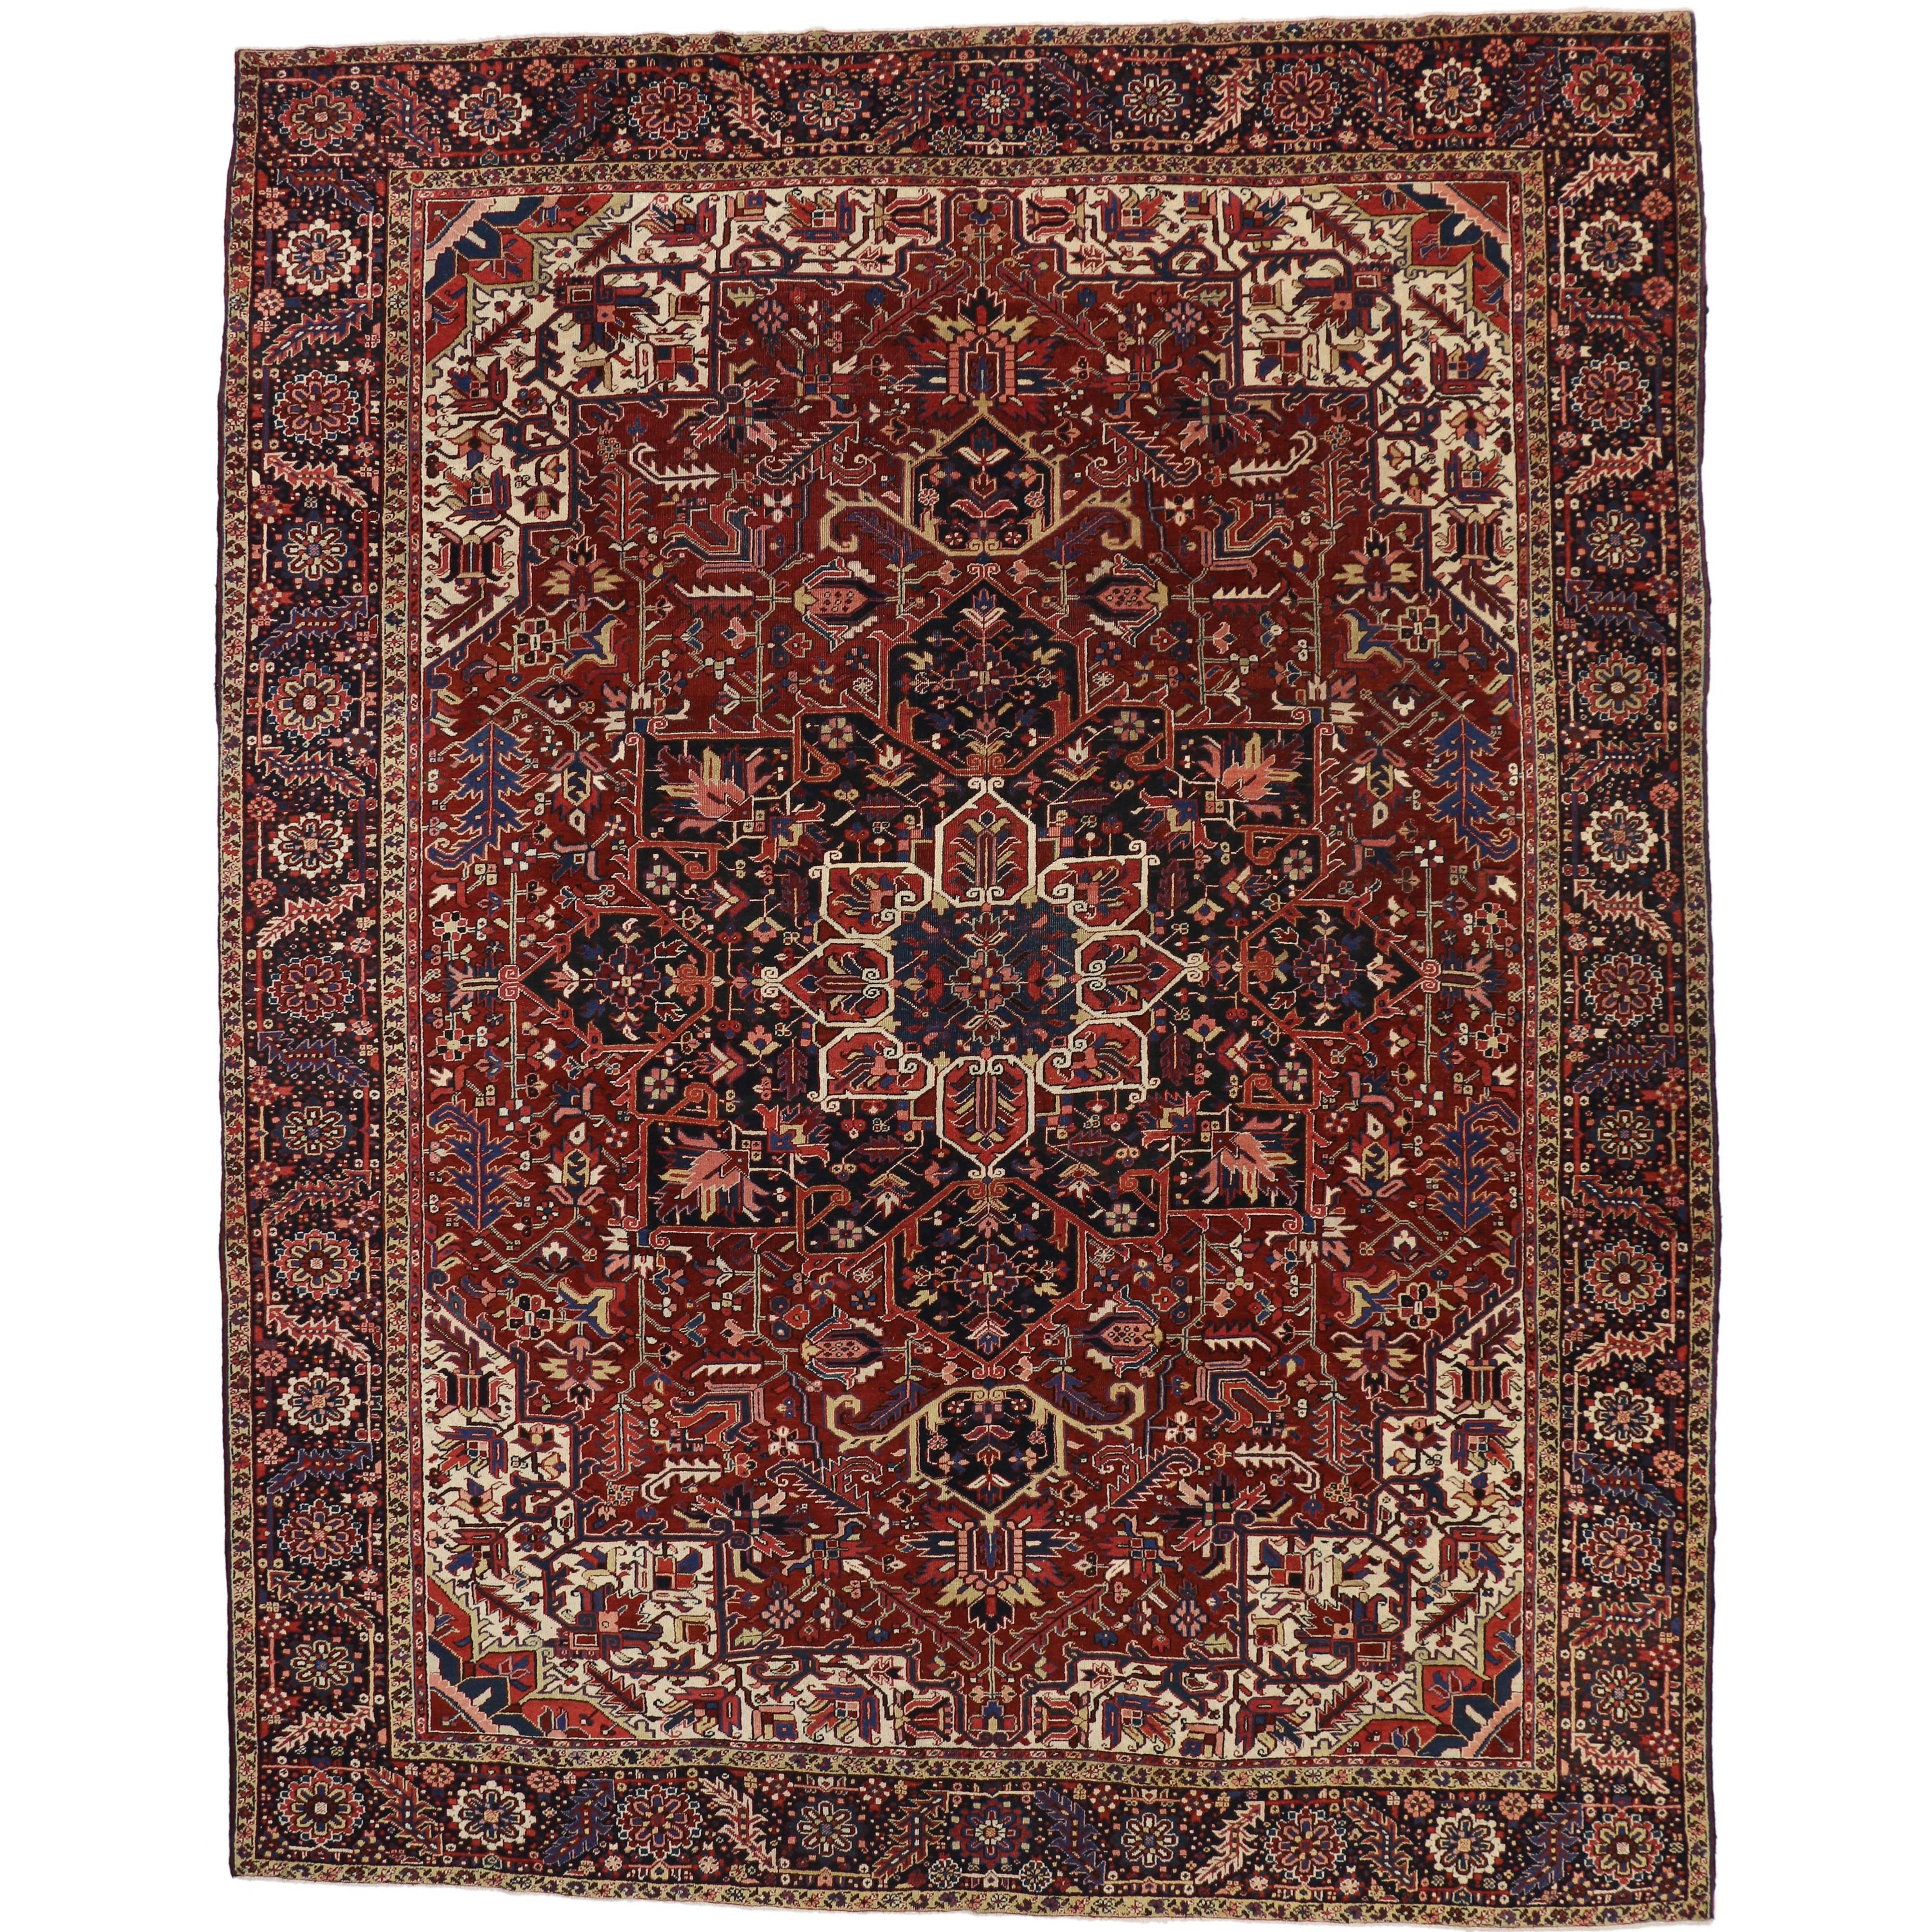 Antique Persian Heriz Rug with English Tudor Manor Style For Sale